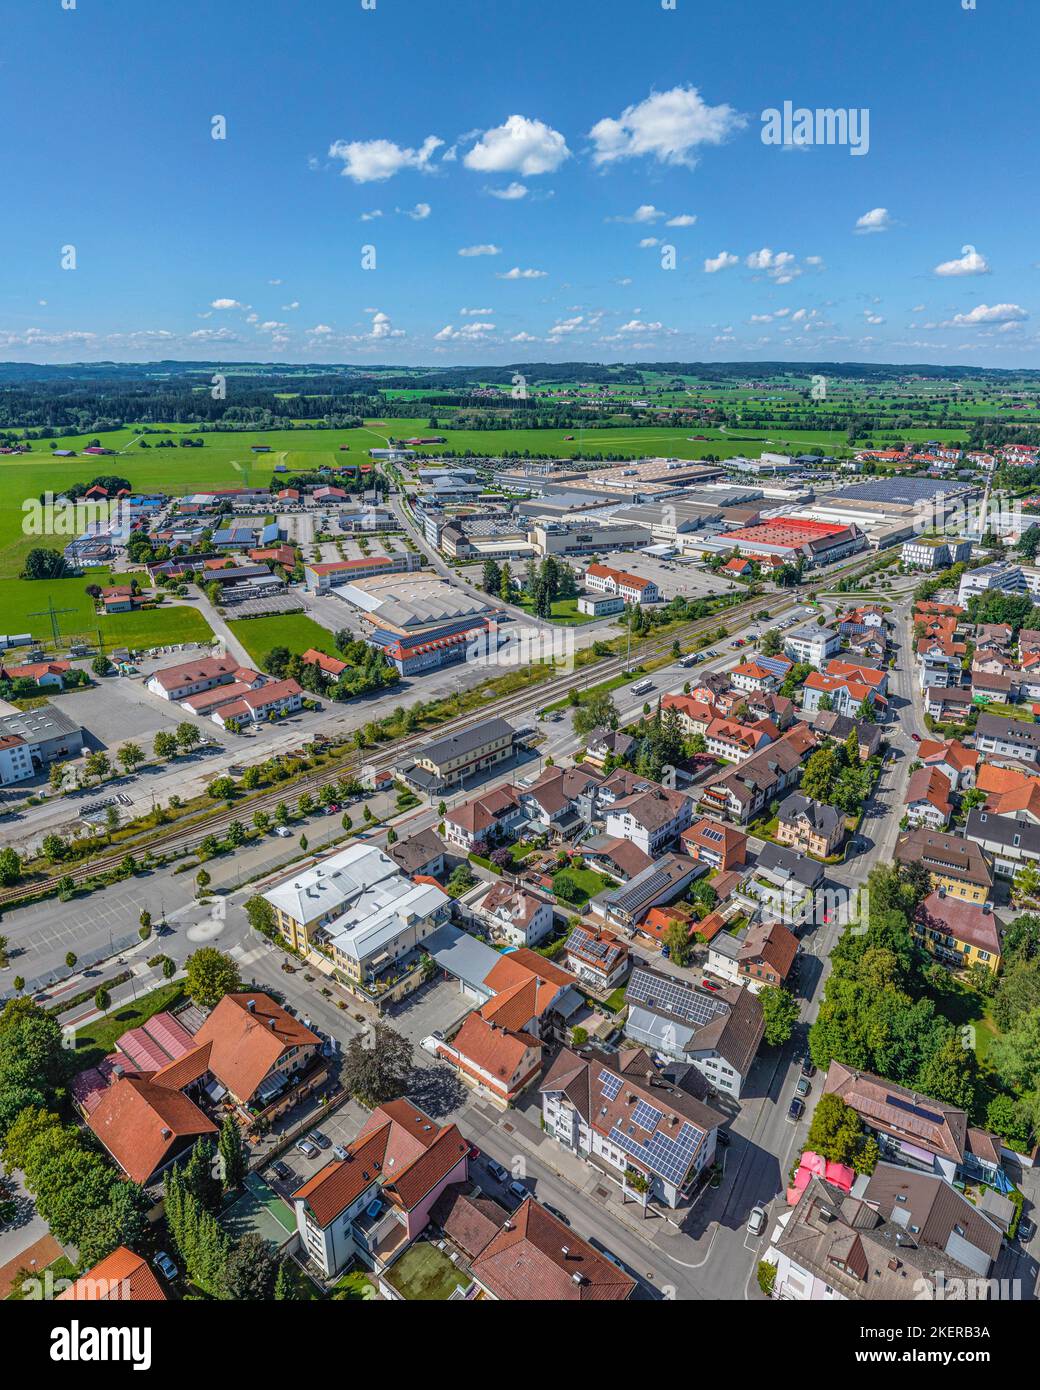 Aerial view of the district capital of the eastern allgaeu, Marktoberdorf Stock Photo